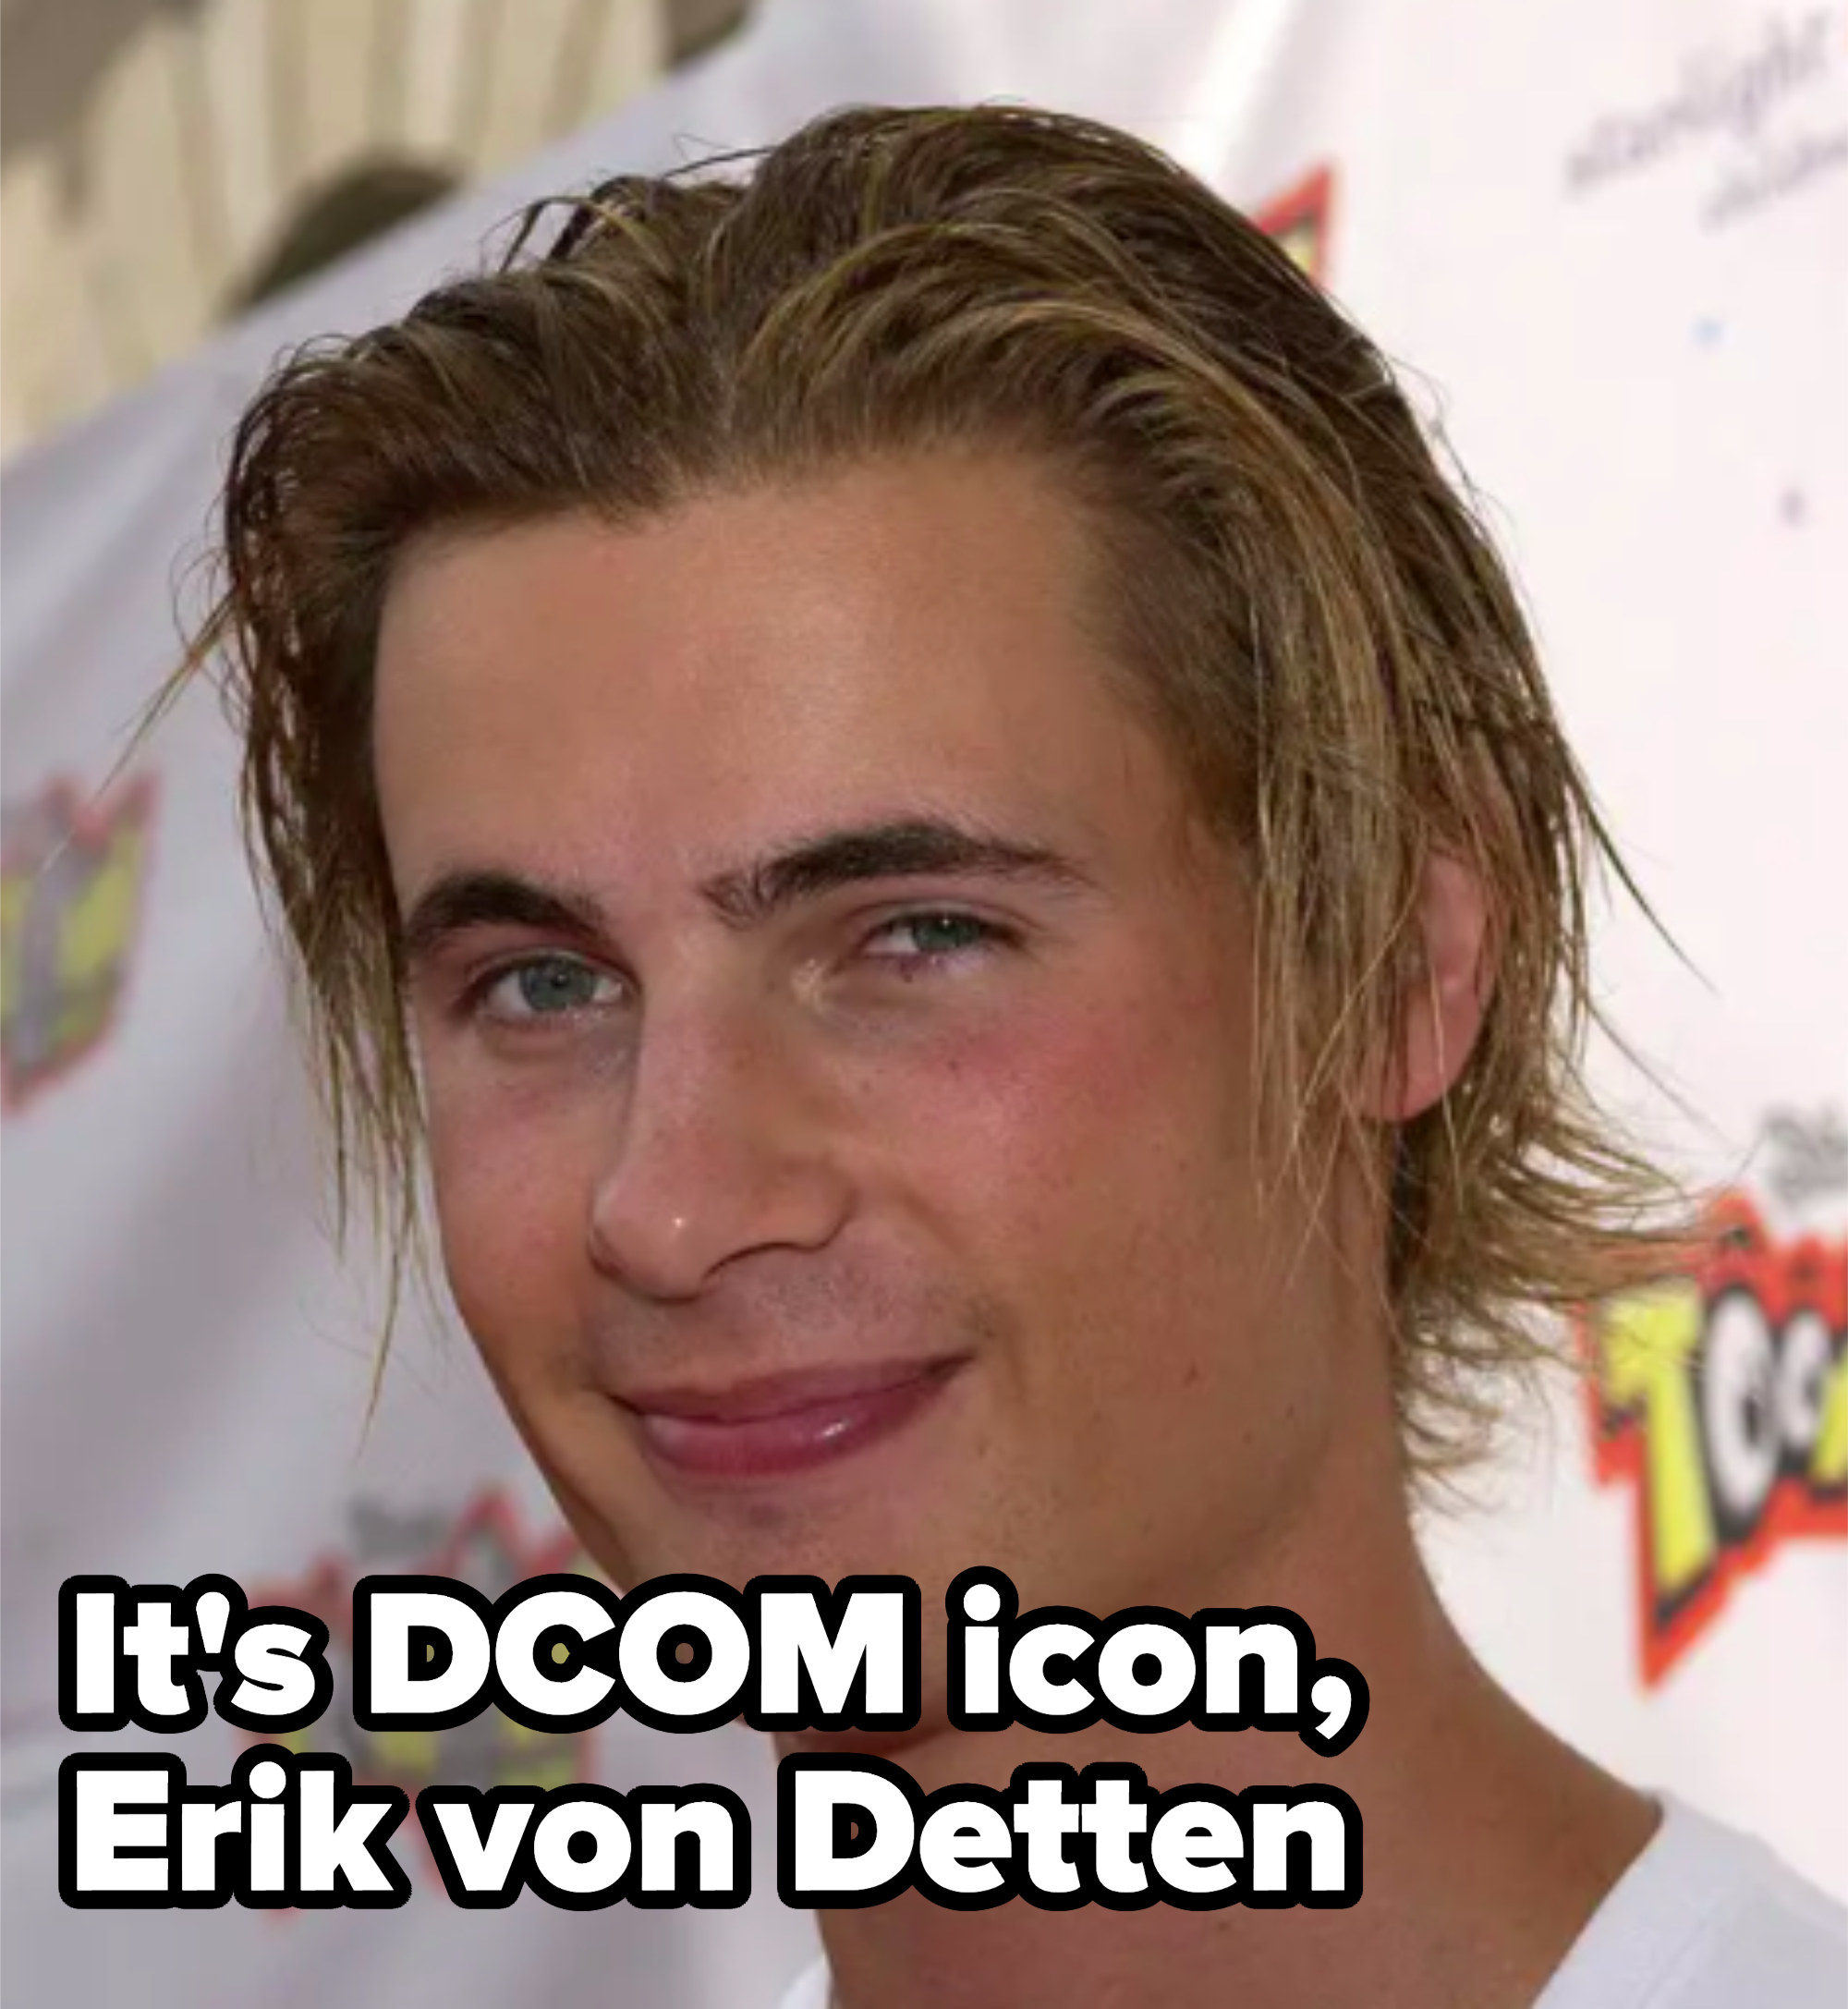 Erik von detten has frosted hair and a cute lil smile